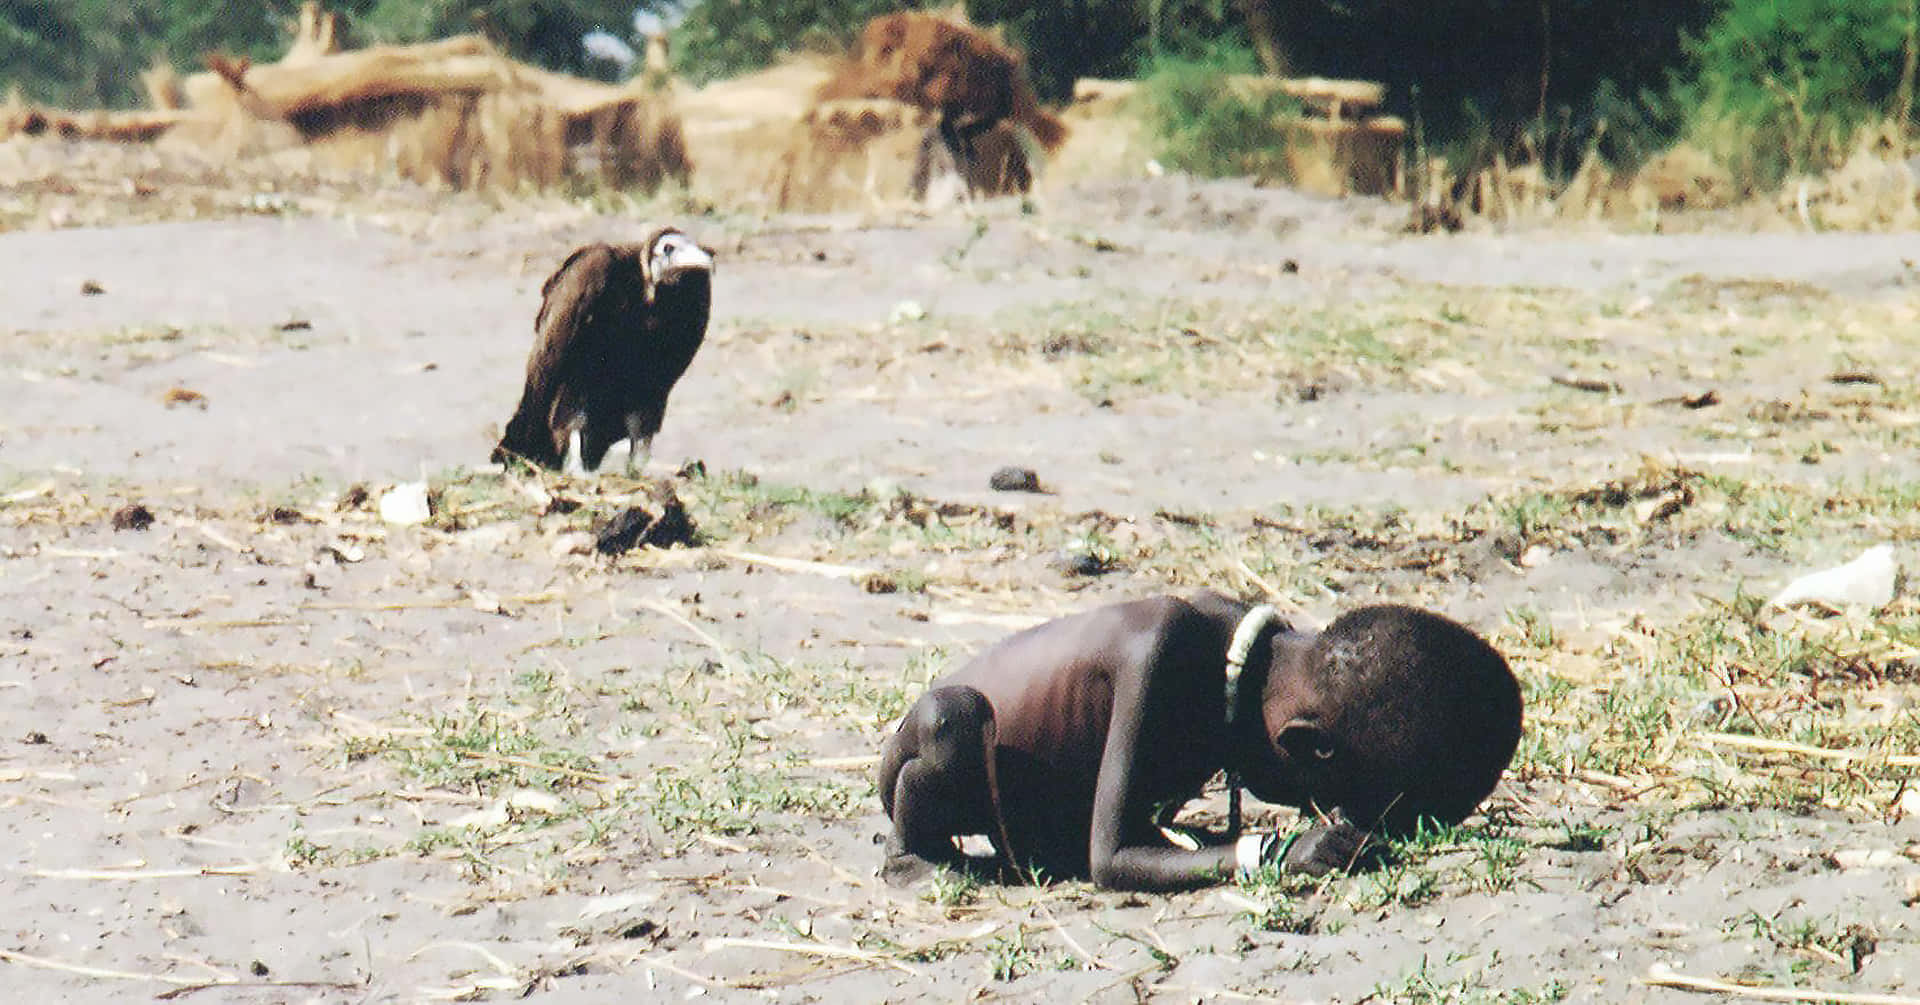 Vulture Preying On Emaciated Child Wallpaper